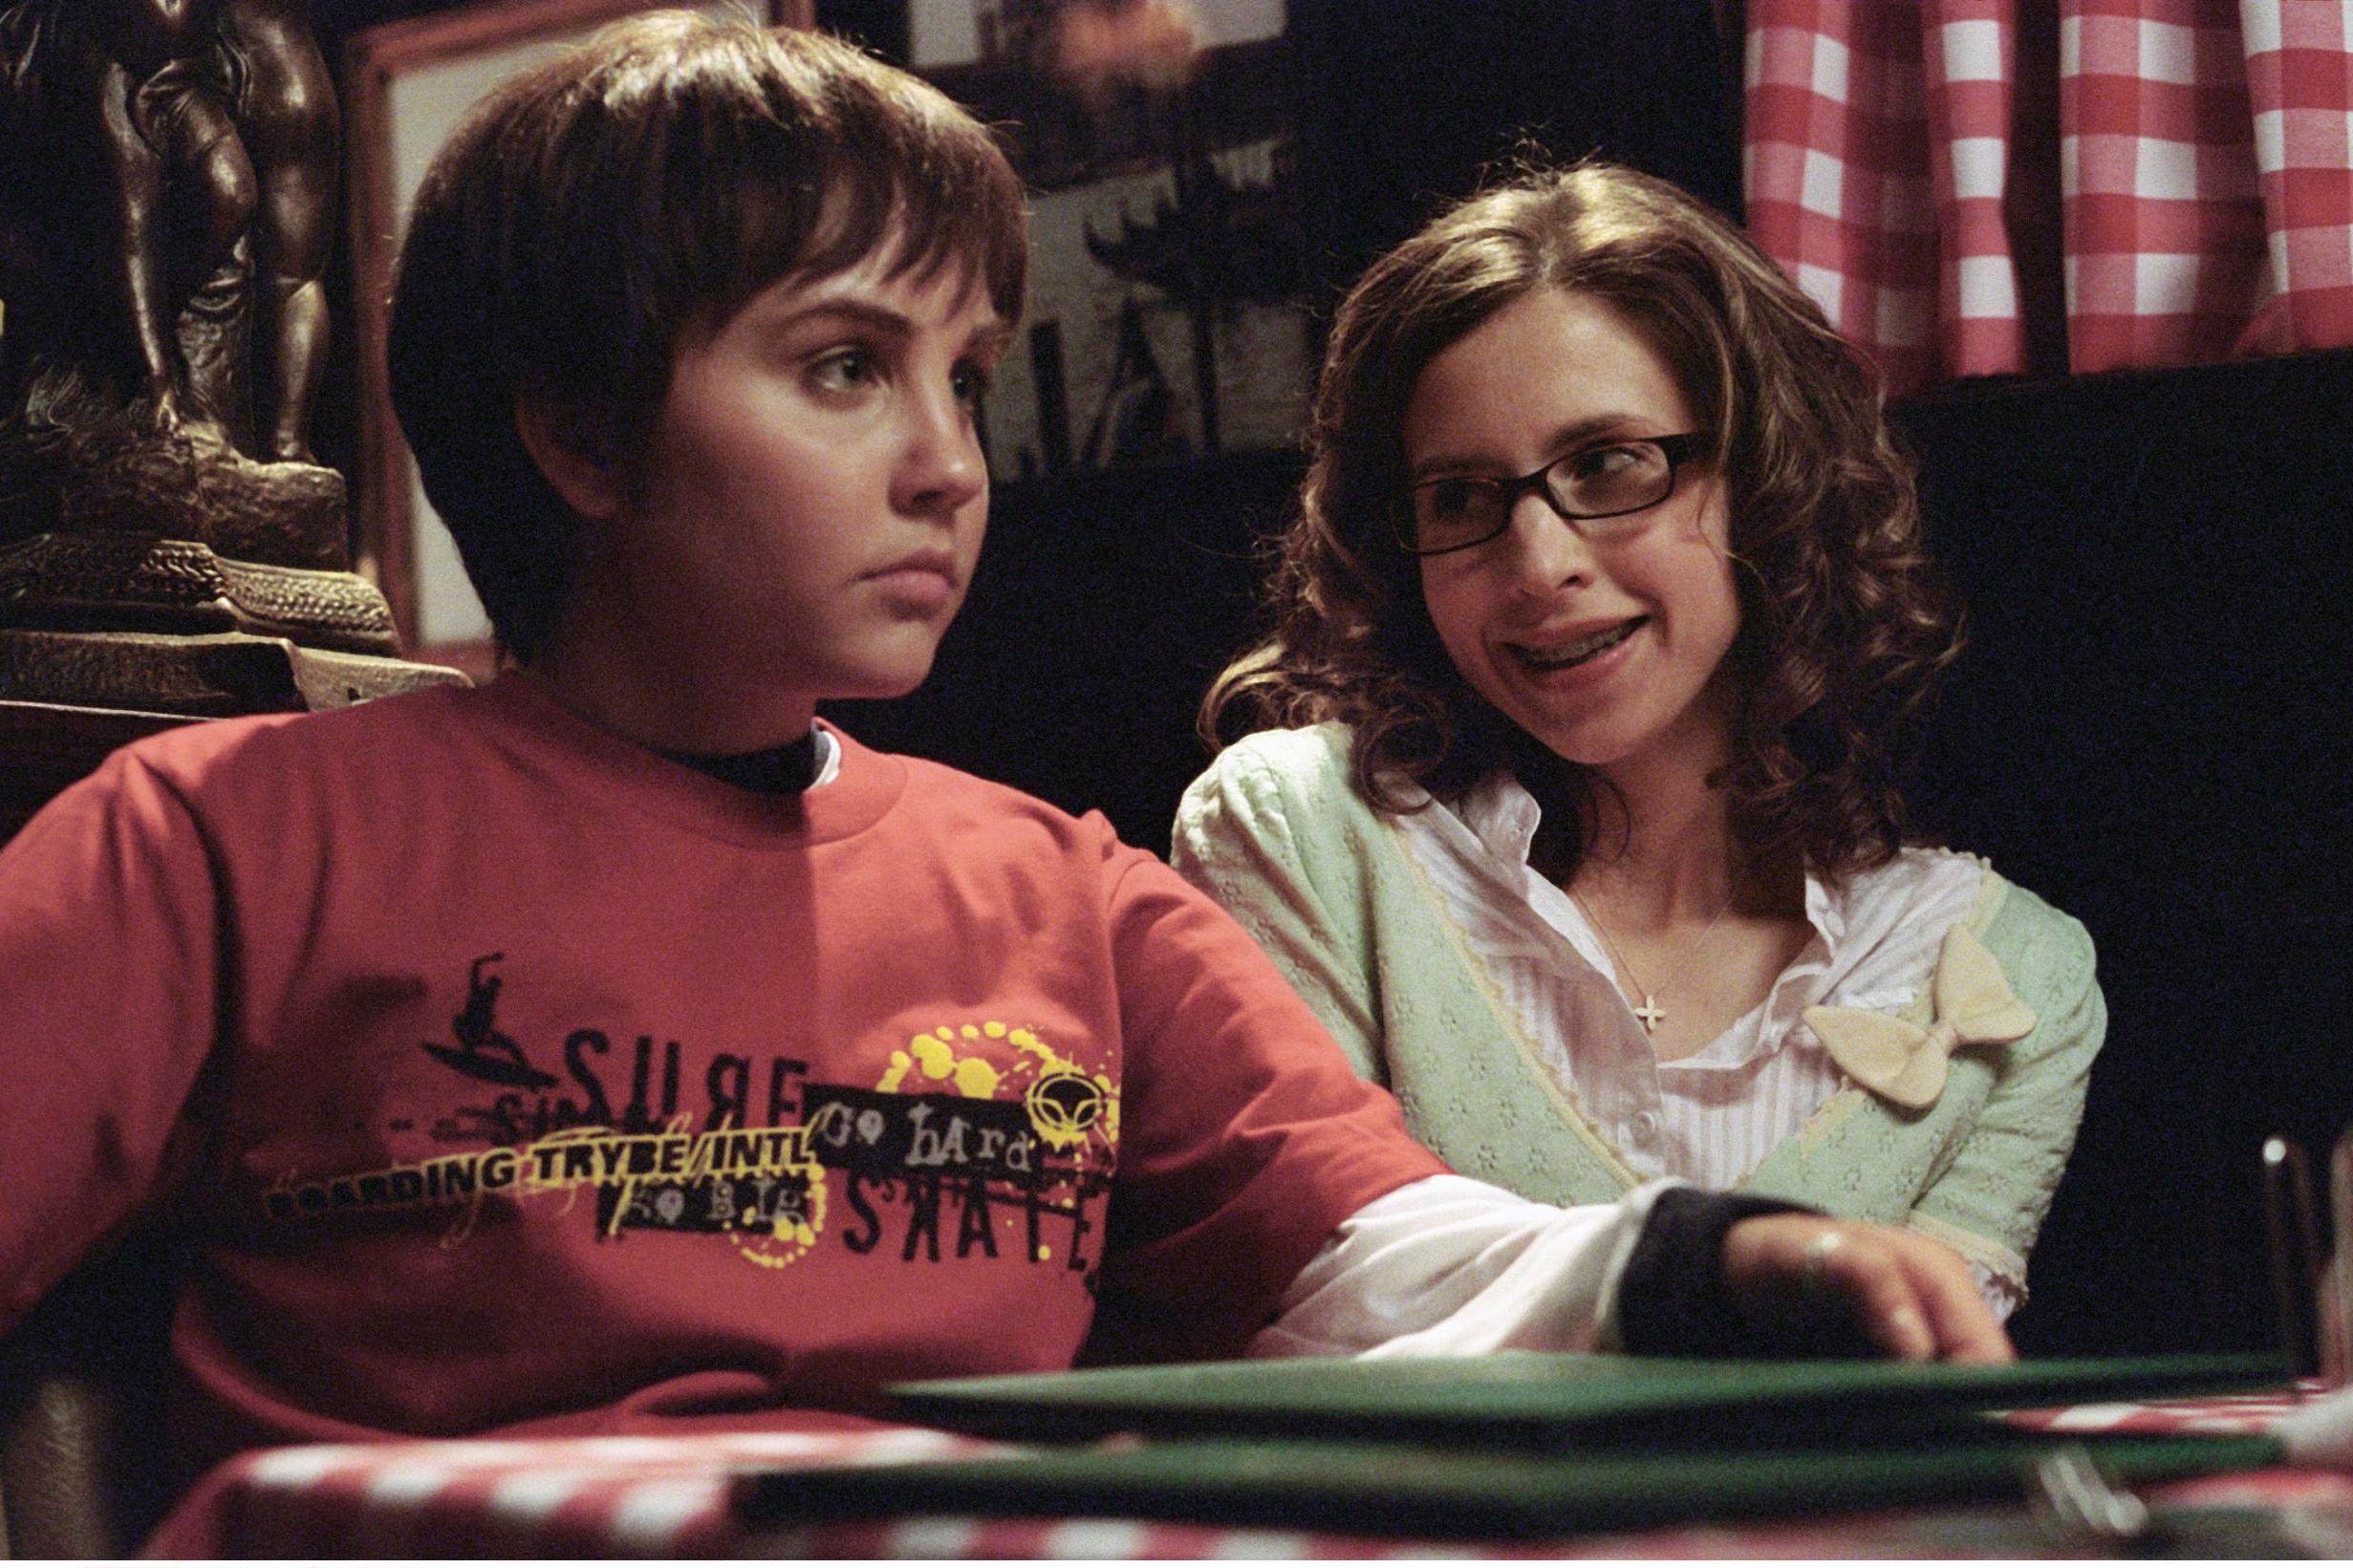 Amanda Bynes (left) as Viola in ‘She’s The Man’, which was inspired by ‘Twelfth Night’